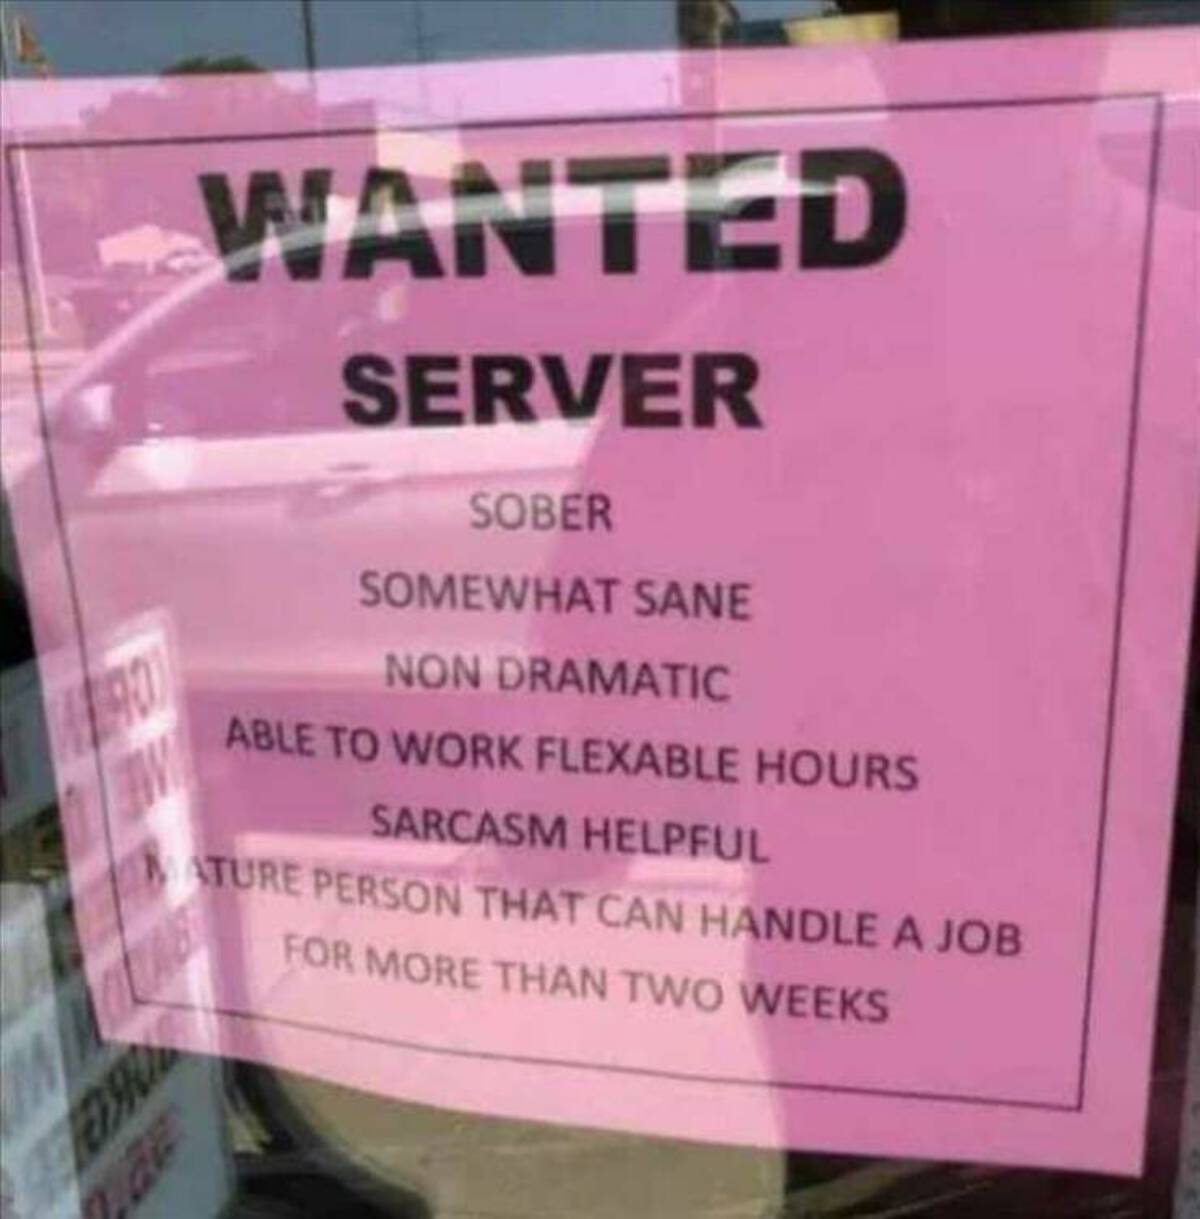 label - Wanted Server Sober Somewhat Sane Non Dramatic Able To Work Flexable Hours Sarcasm Helpful Ture Person That Can Handle A Job For More Than Two Weeks